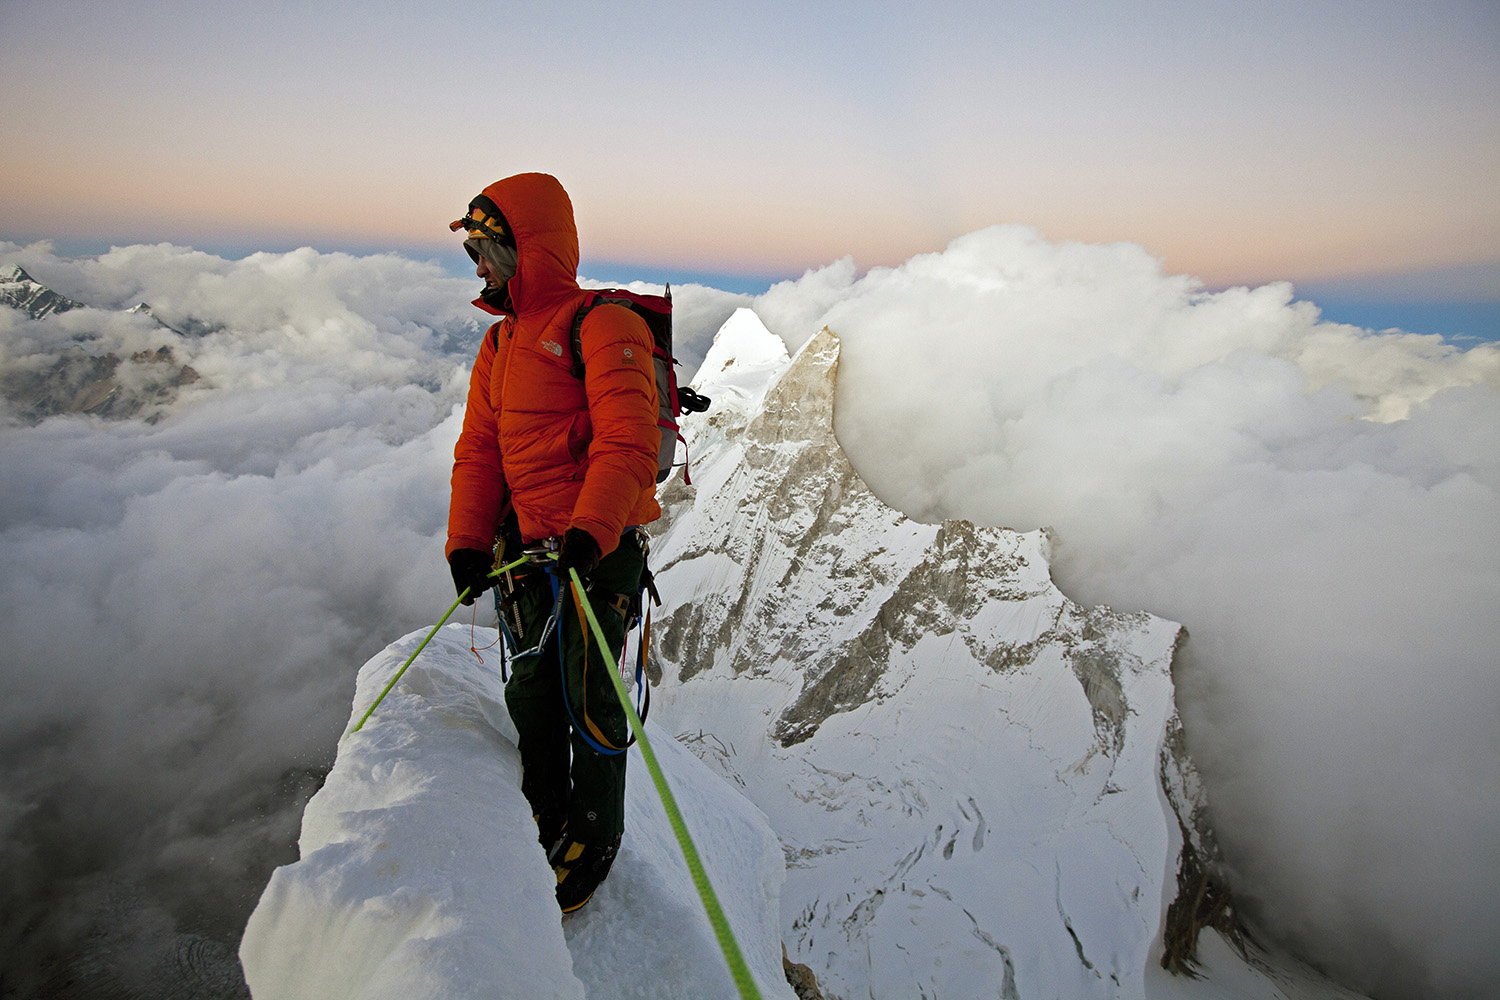 Exhausted, Renan Ozturk contemplates the long descent after making the summit.